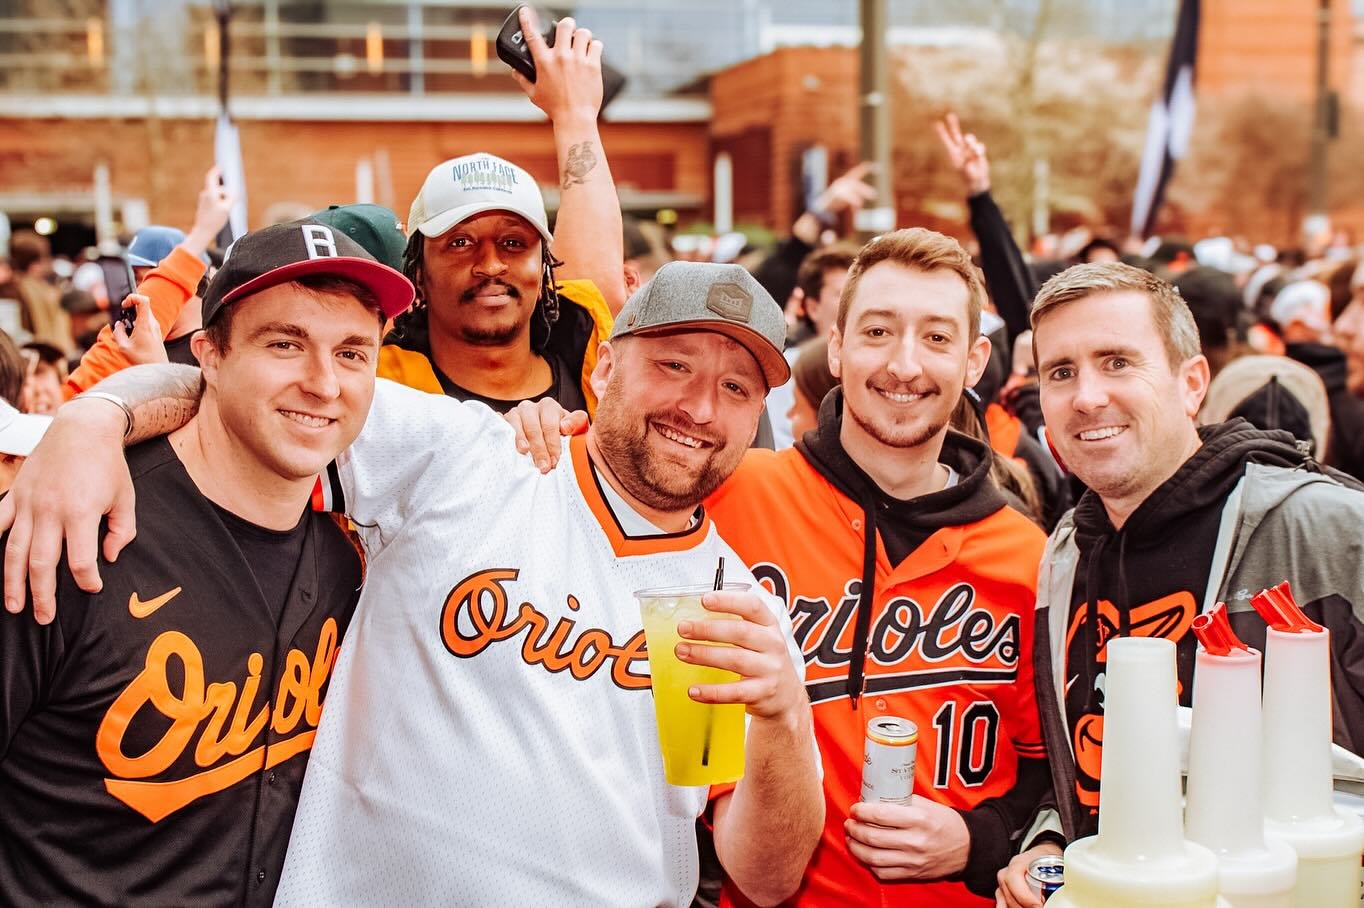 This is Sunday Funday weather 😎☀️ #oriolesnation 

📸: @shotby_allen